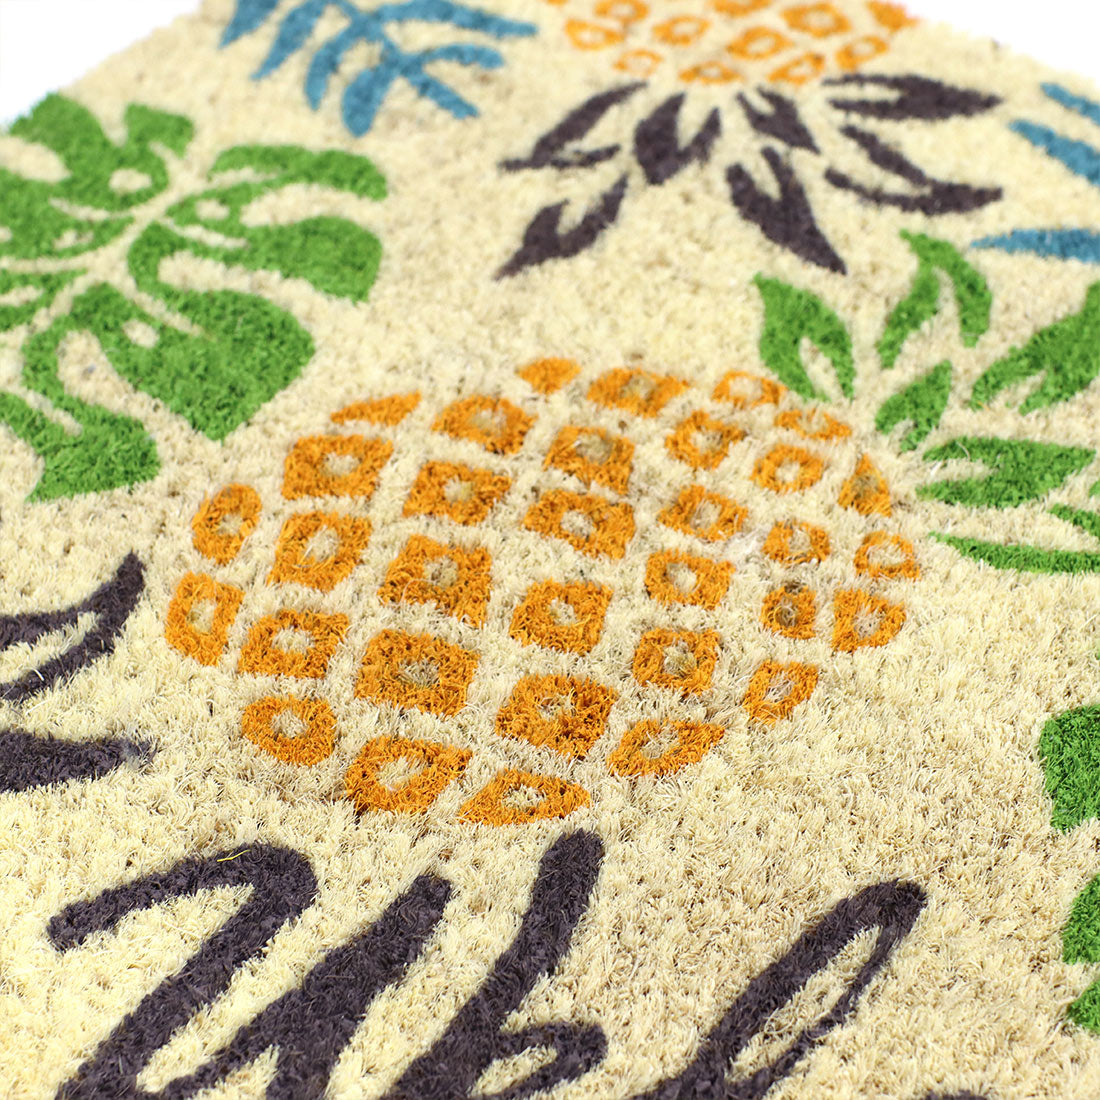 COCONUTS MAT　WELCOME PINEAPPLE